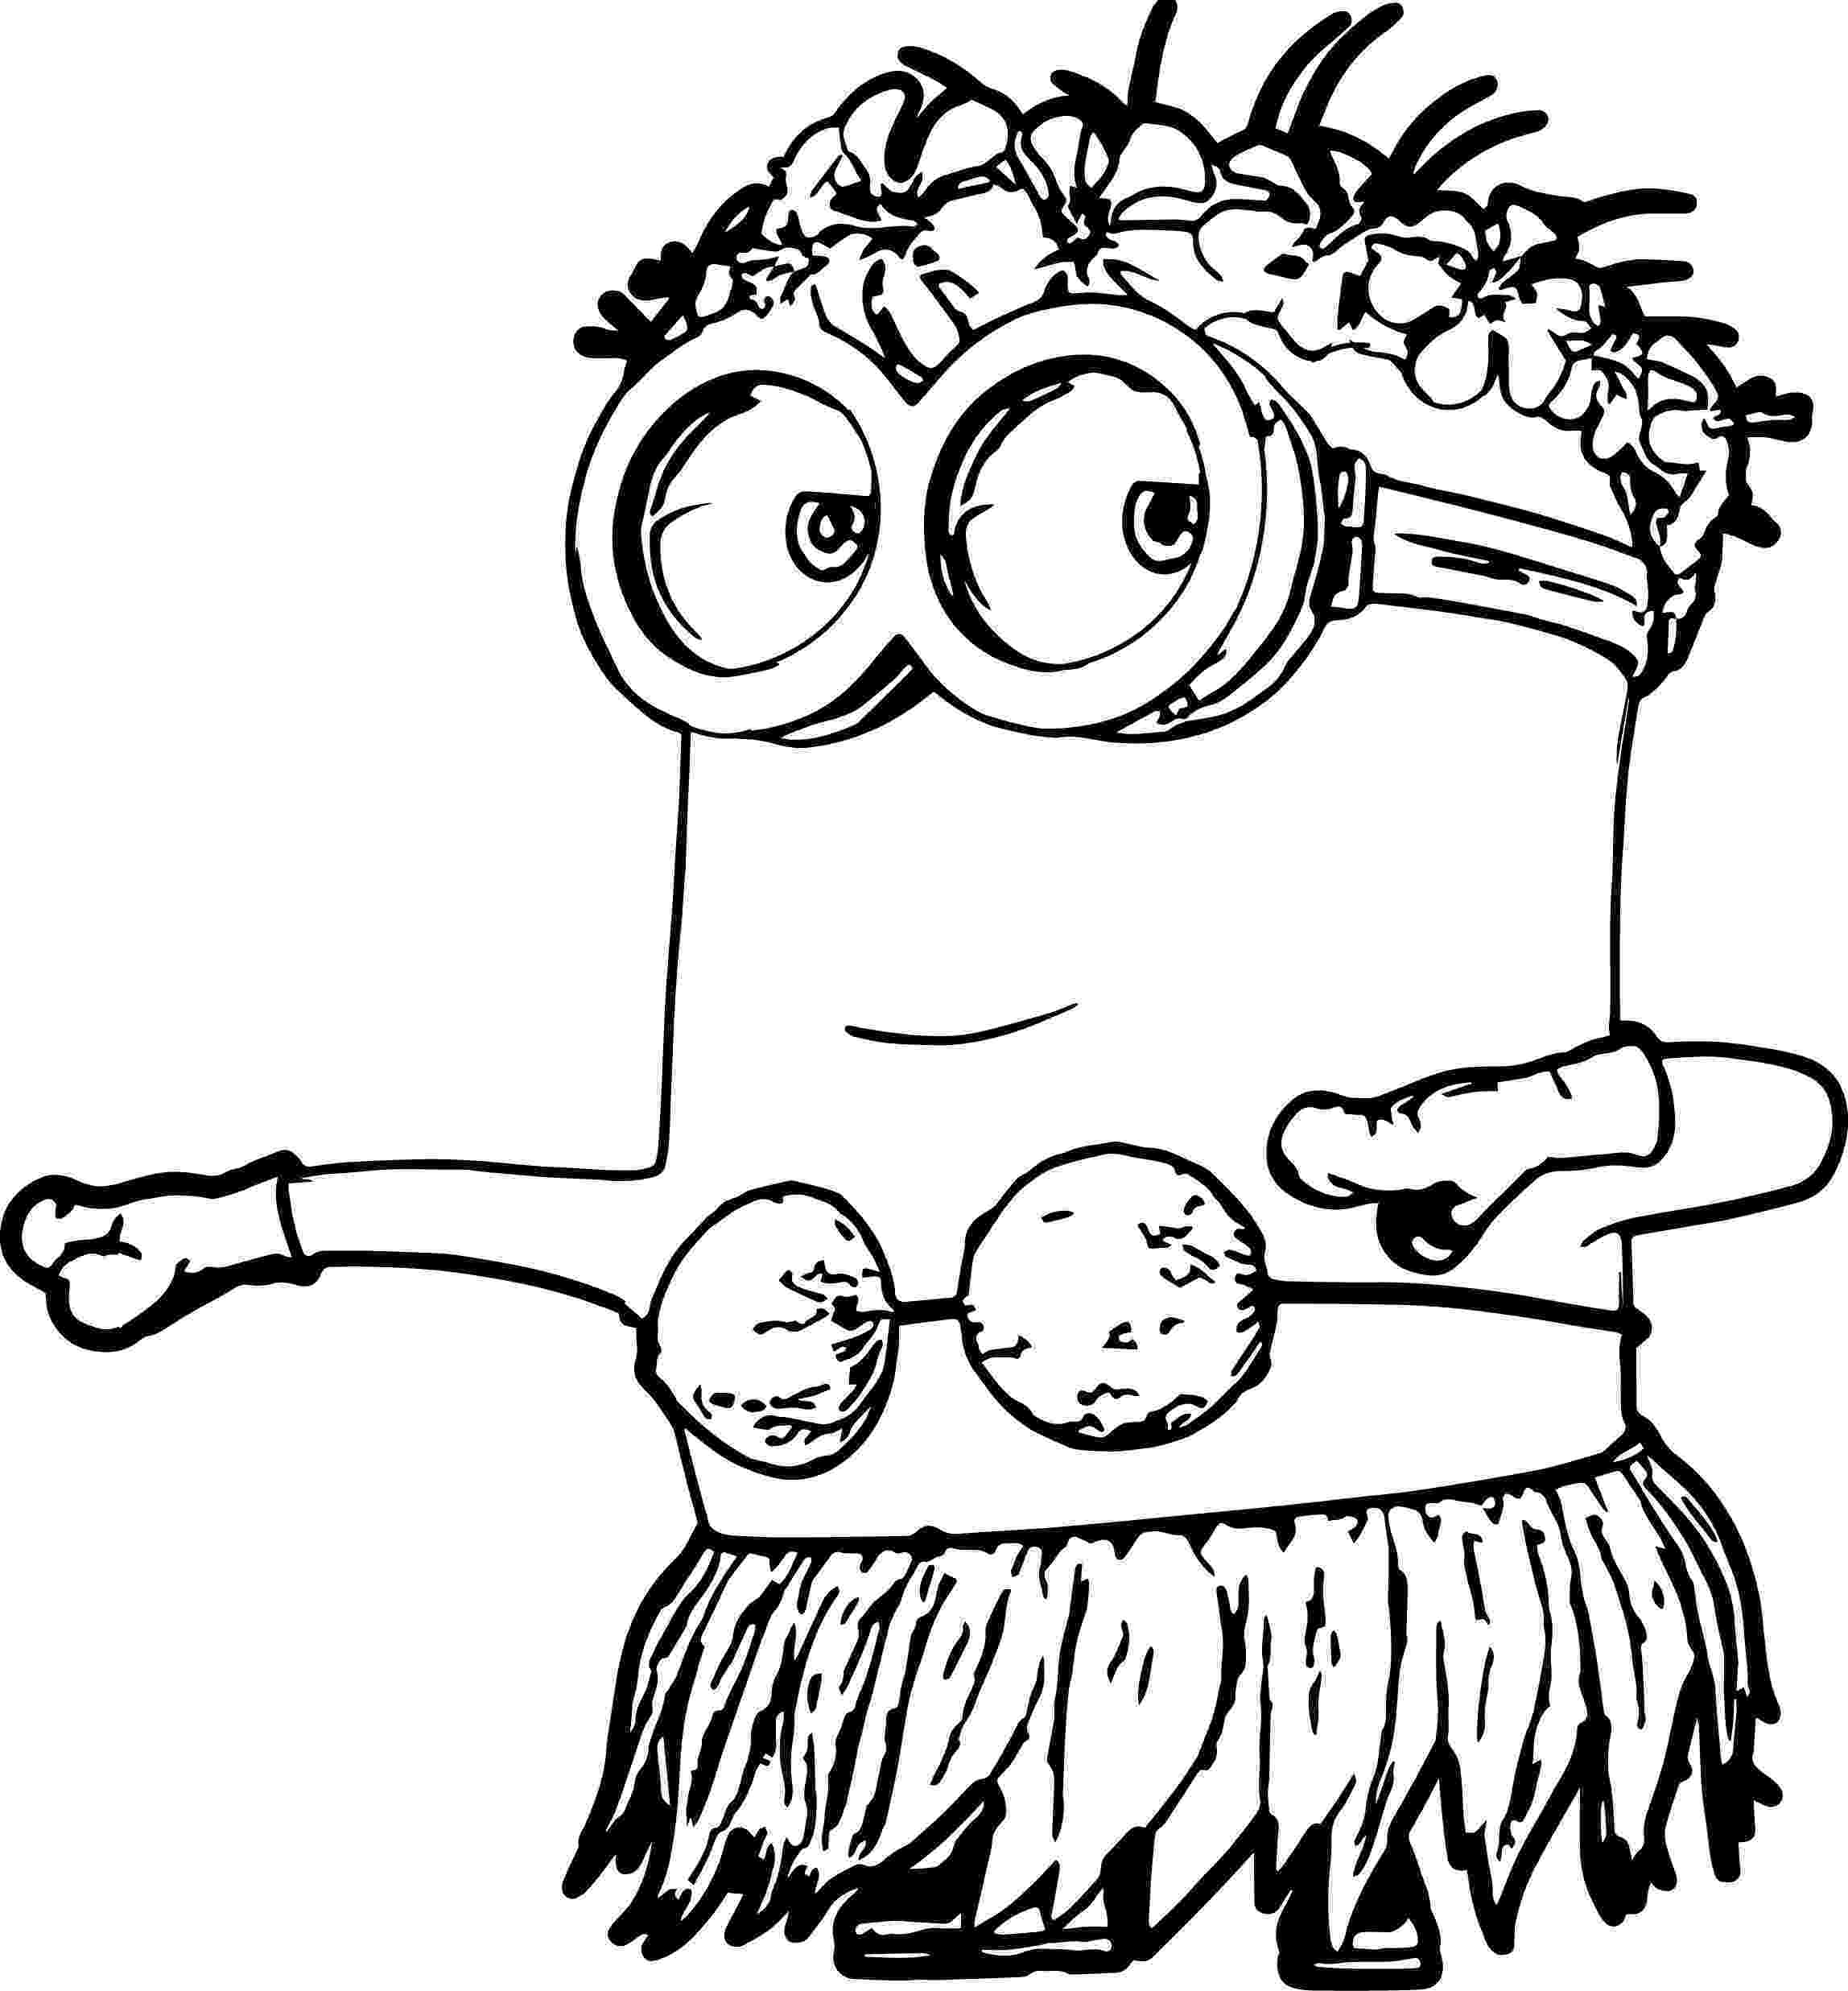 minion pictures to color and print minion coloring pages best coloring pages for kids color minion to print pictures and 